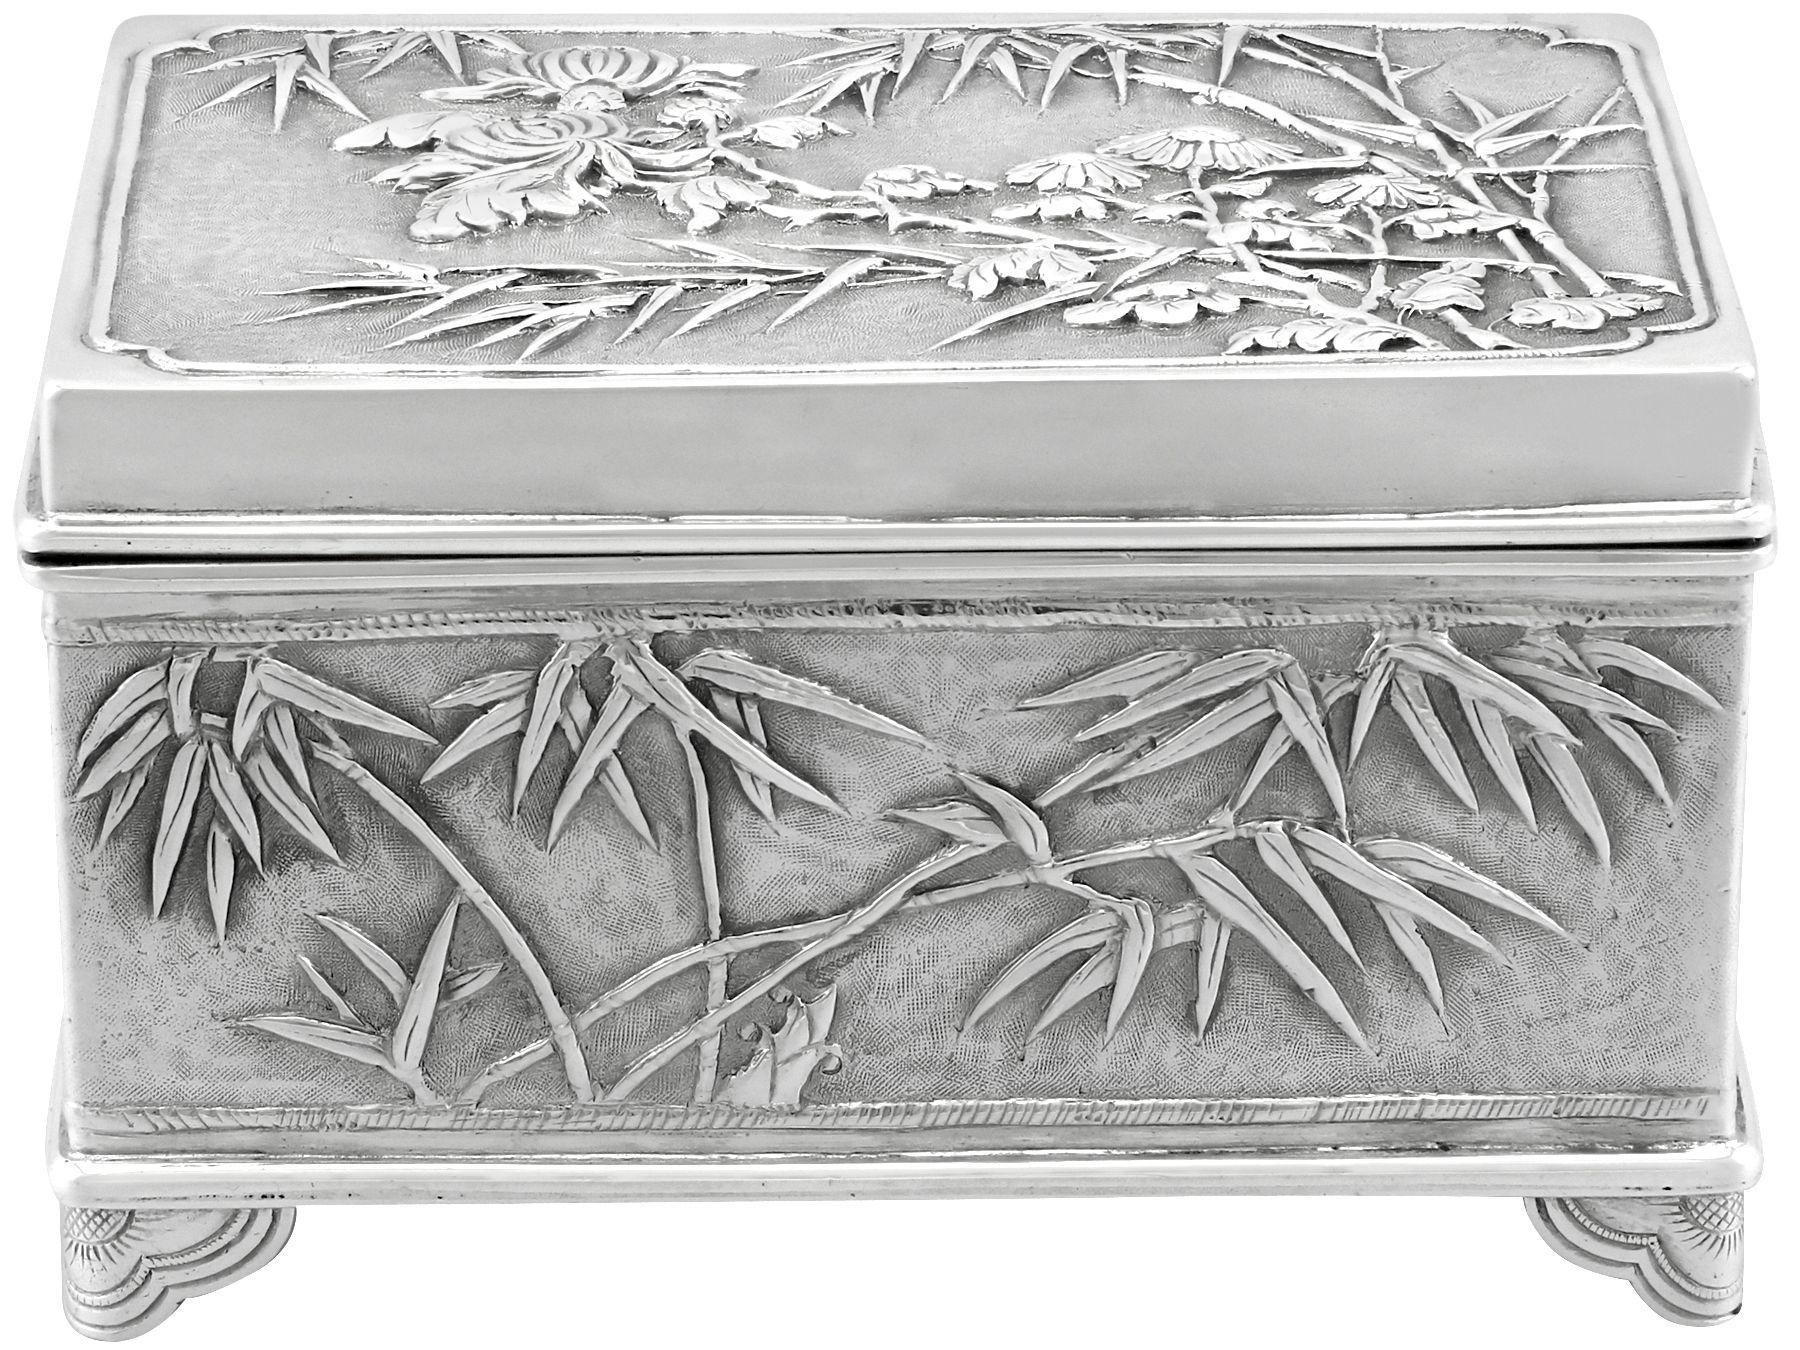 An exceptional, fine and impressive antique Chinese export silver box; an addition to our range of silver boxes and cases

This exceptional antique Chinese Silver box has a rectangular form onto four bracket style feet.

The surface of the body is